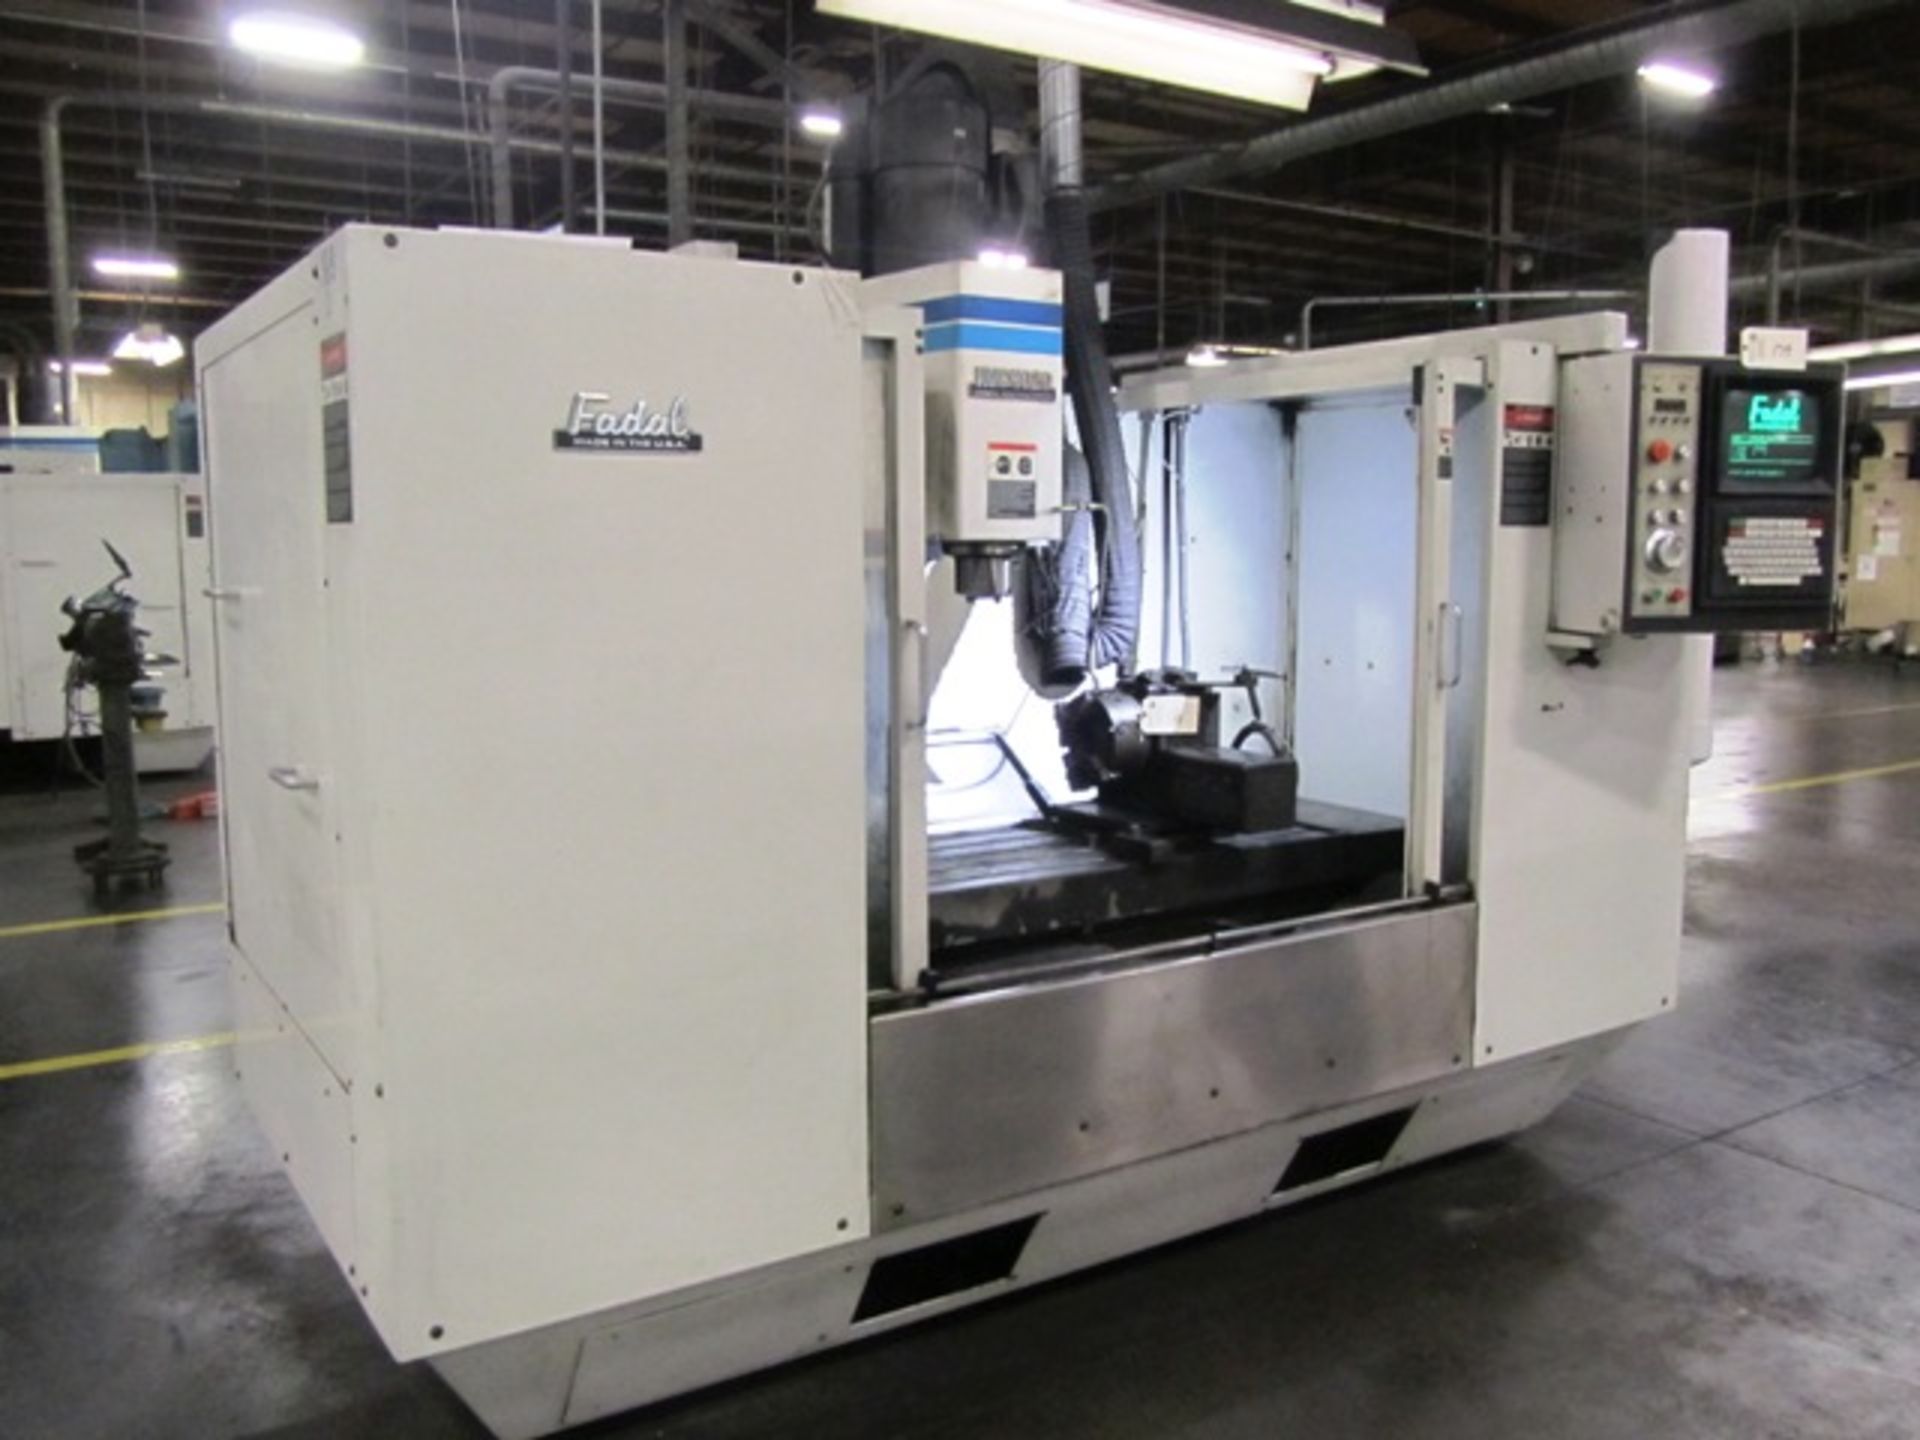 Fadal Model 4020 Vertical Machining Center with 20 ATC, 40 Taper, 20'' x 48'' Table, Fadal CNC - Image 3 of 3